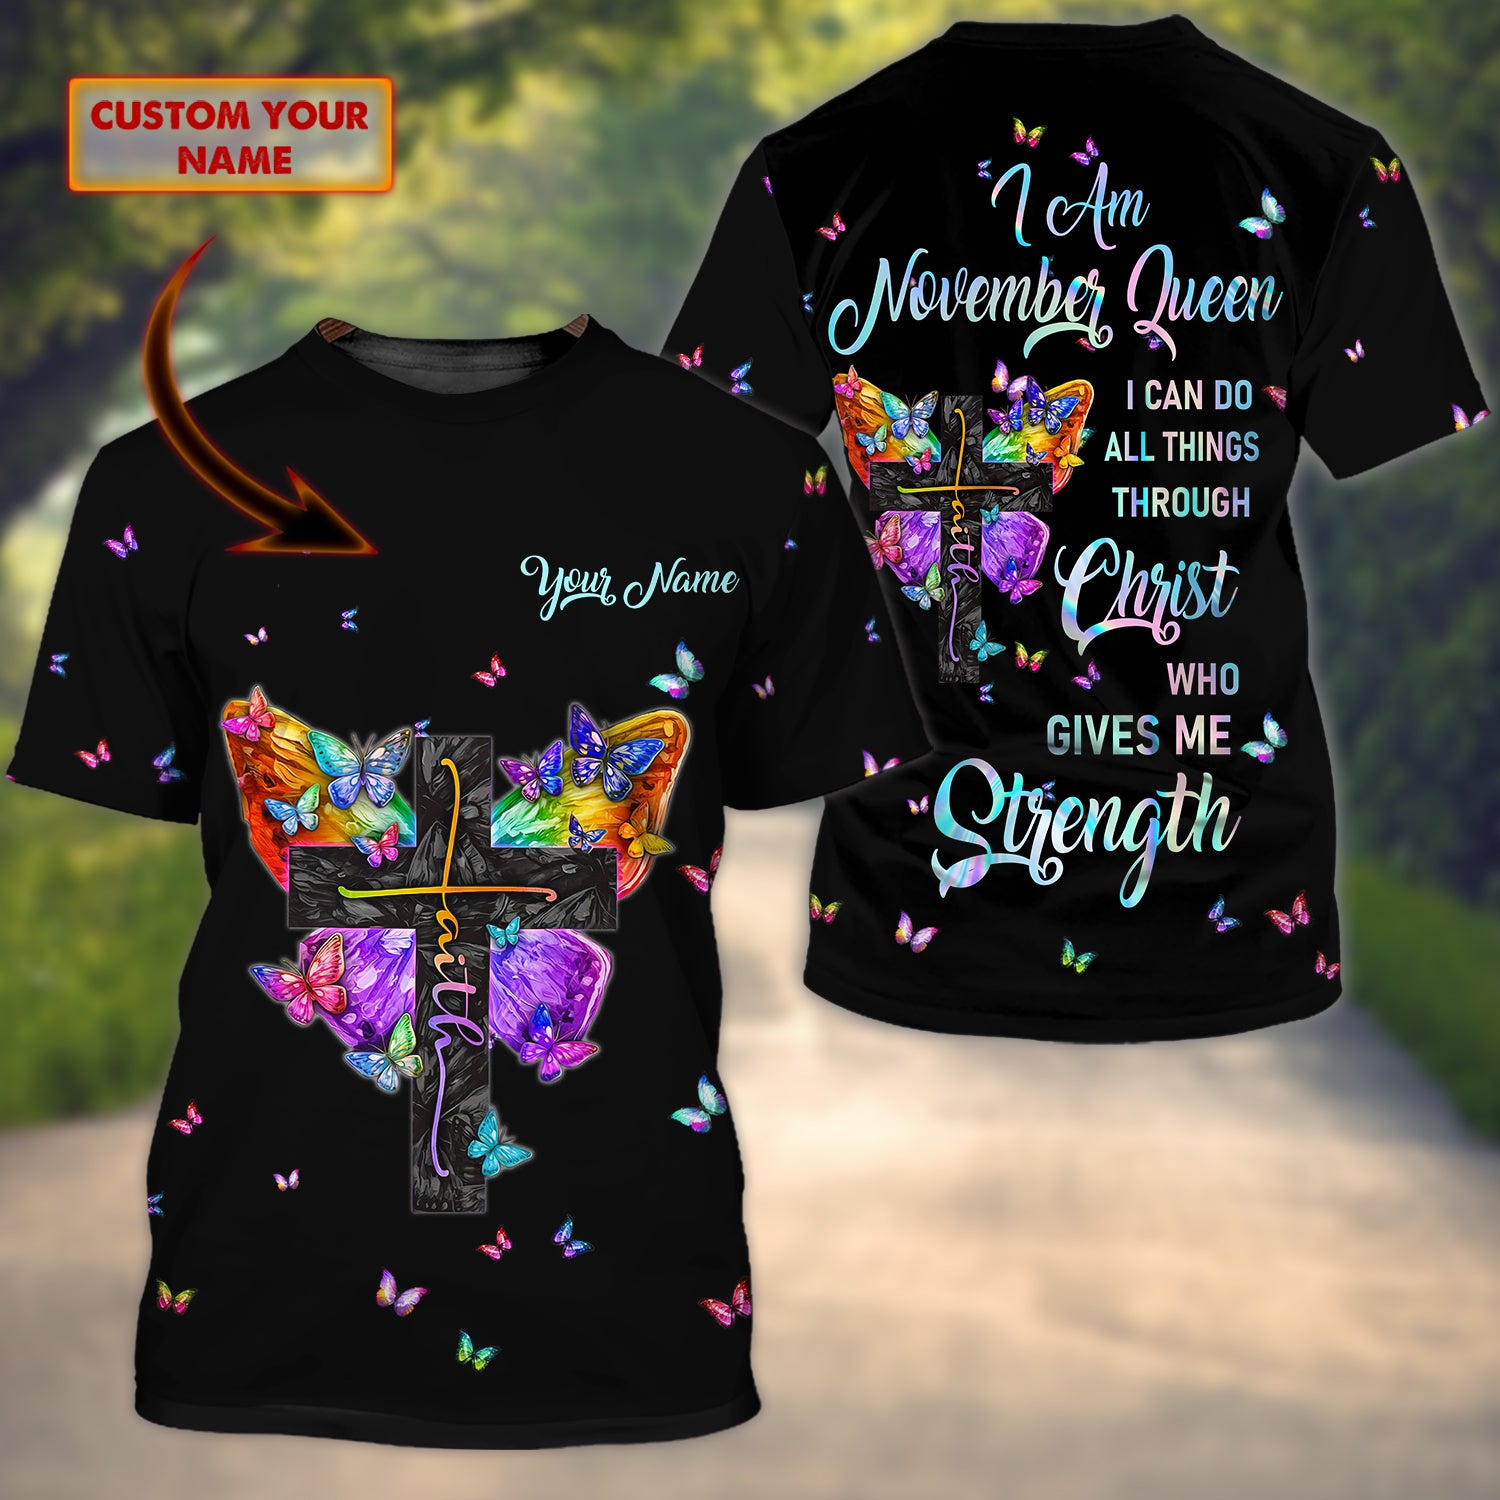 November Queen - Personalized Name 3D Tshirt 52 - Bhn97